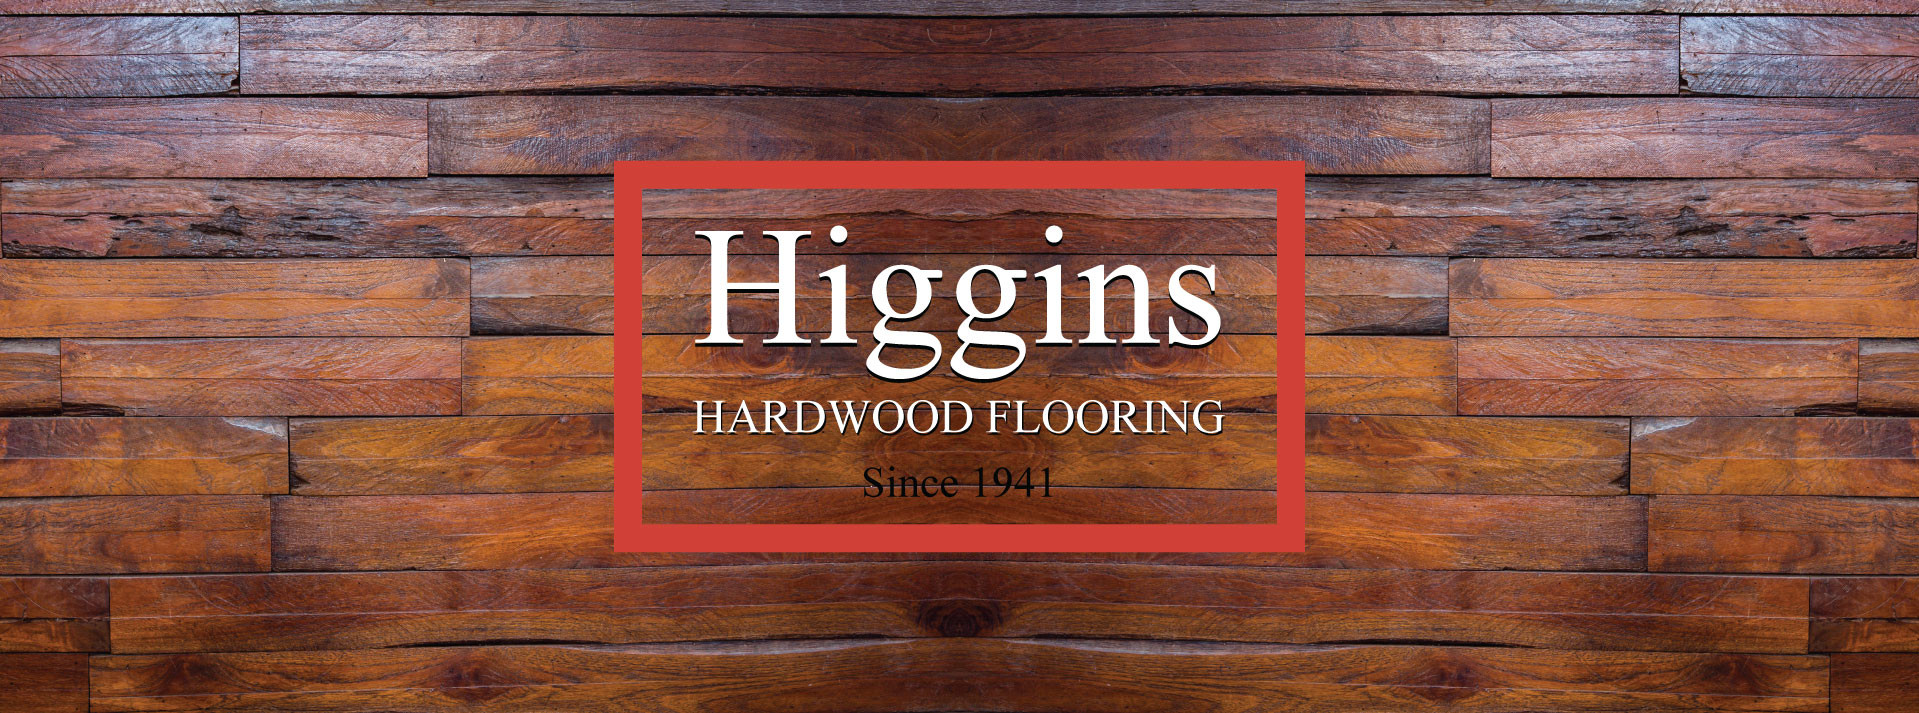 21 Famous Hardwood Floor Cleaners Consumer Reviews 2024 free download hardwood floor cleaners consumer reviews of higgins hardwood flooring in peterborough oshawa lindsay ajax for office hours